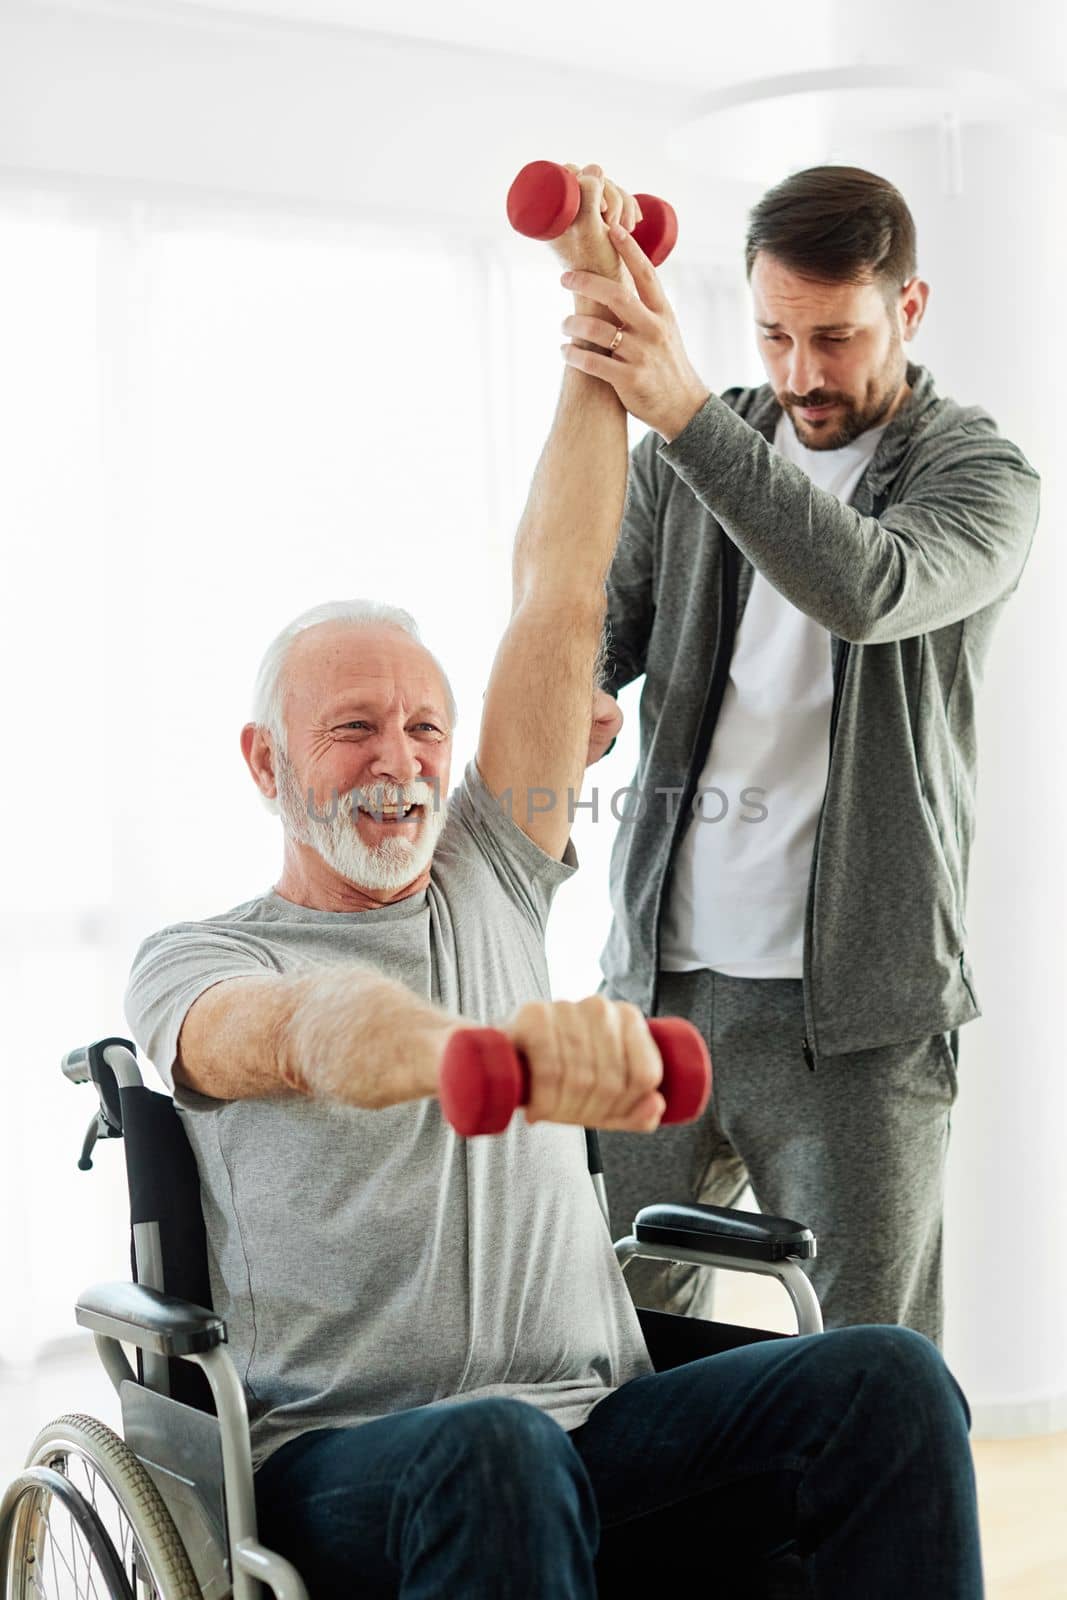 senior care exercise physical therapy exercising help assistence retirement home physiotherapy physiotherapist fitness gym strech band clinic therapist elderly man by Picsfive